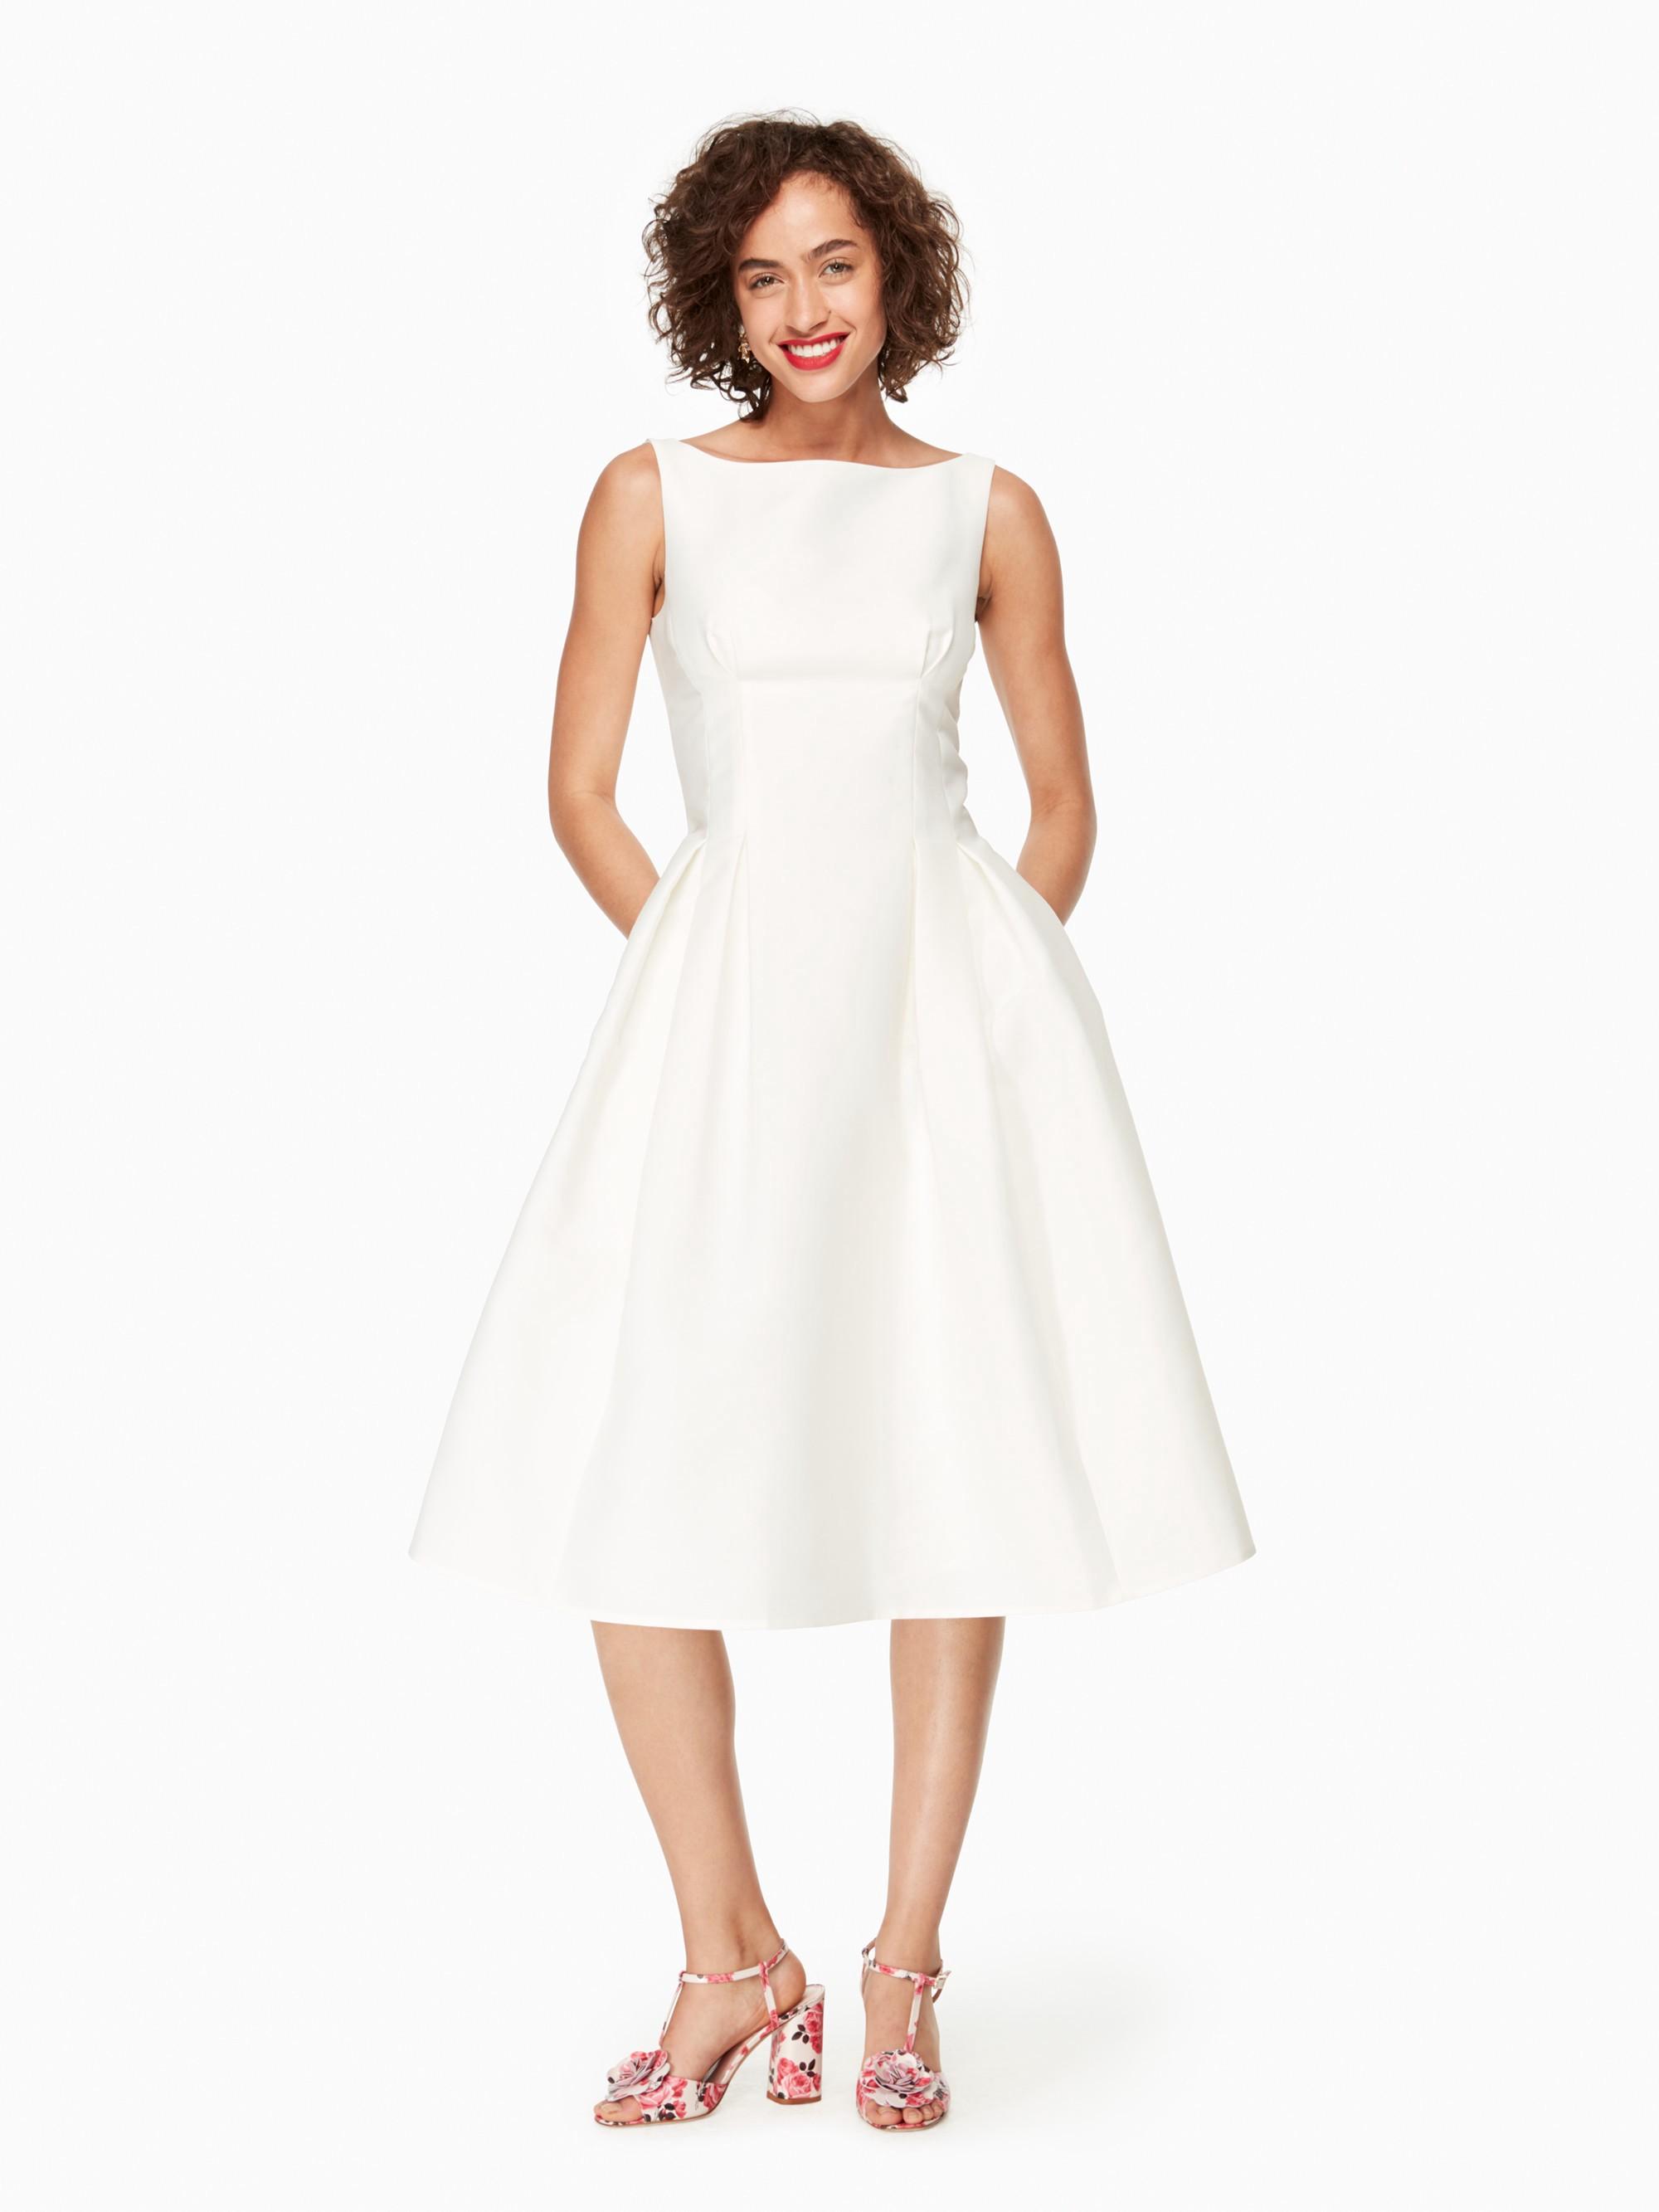 kate spade fit and flare dress